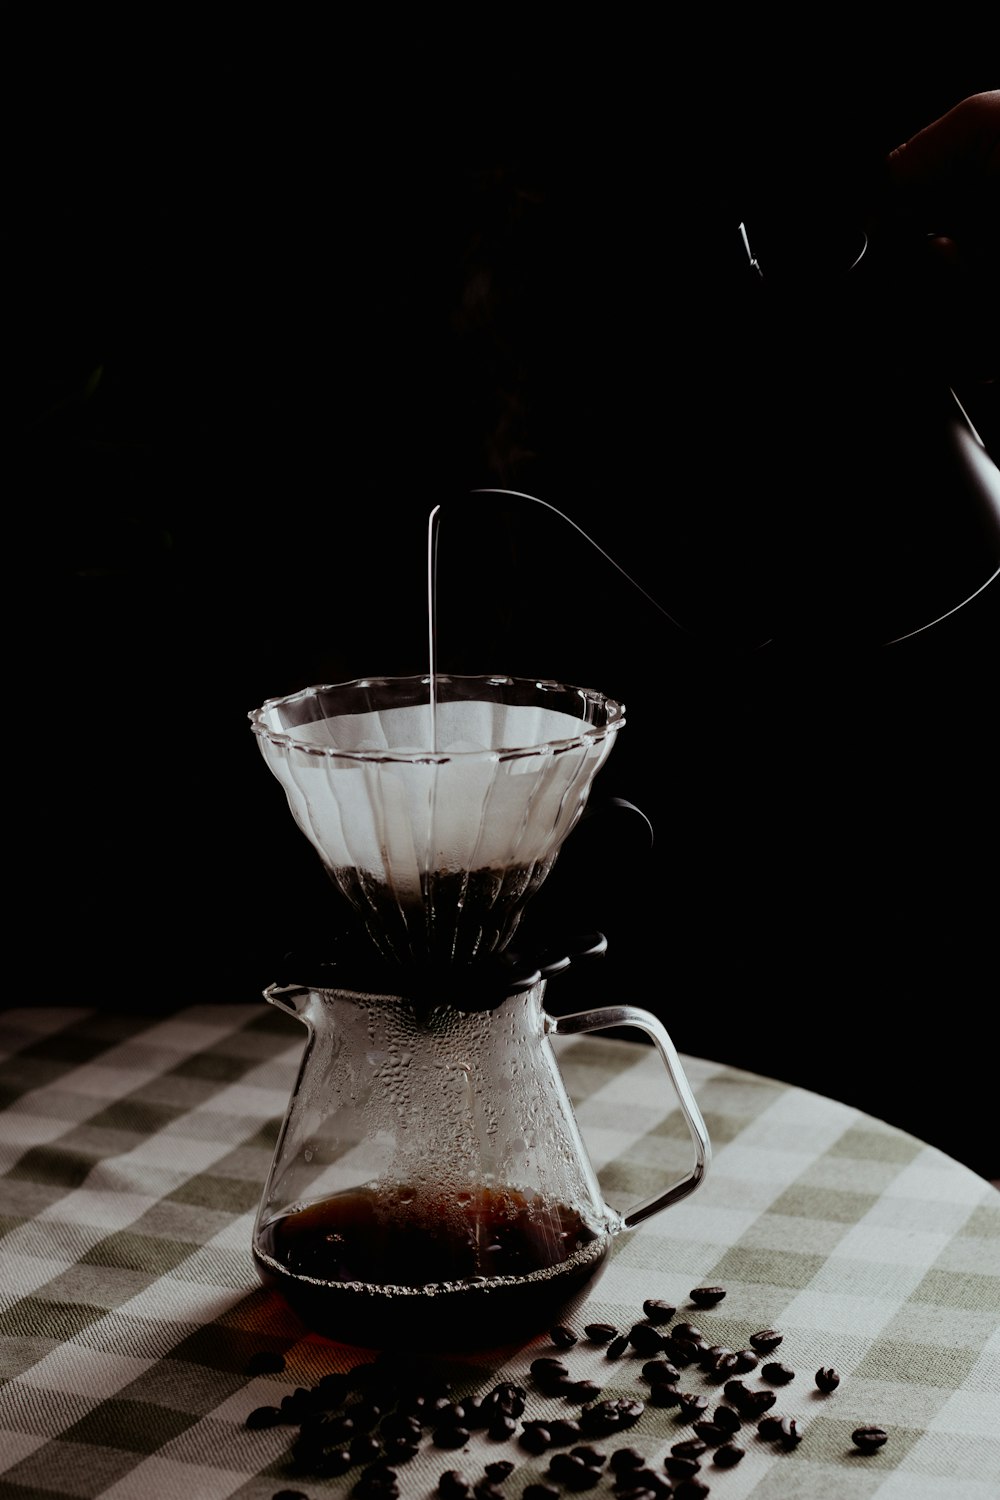 a person pours coffee into a glass pitcher